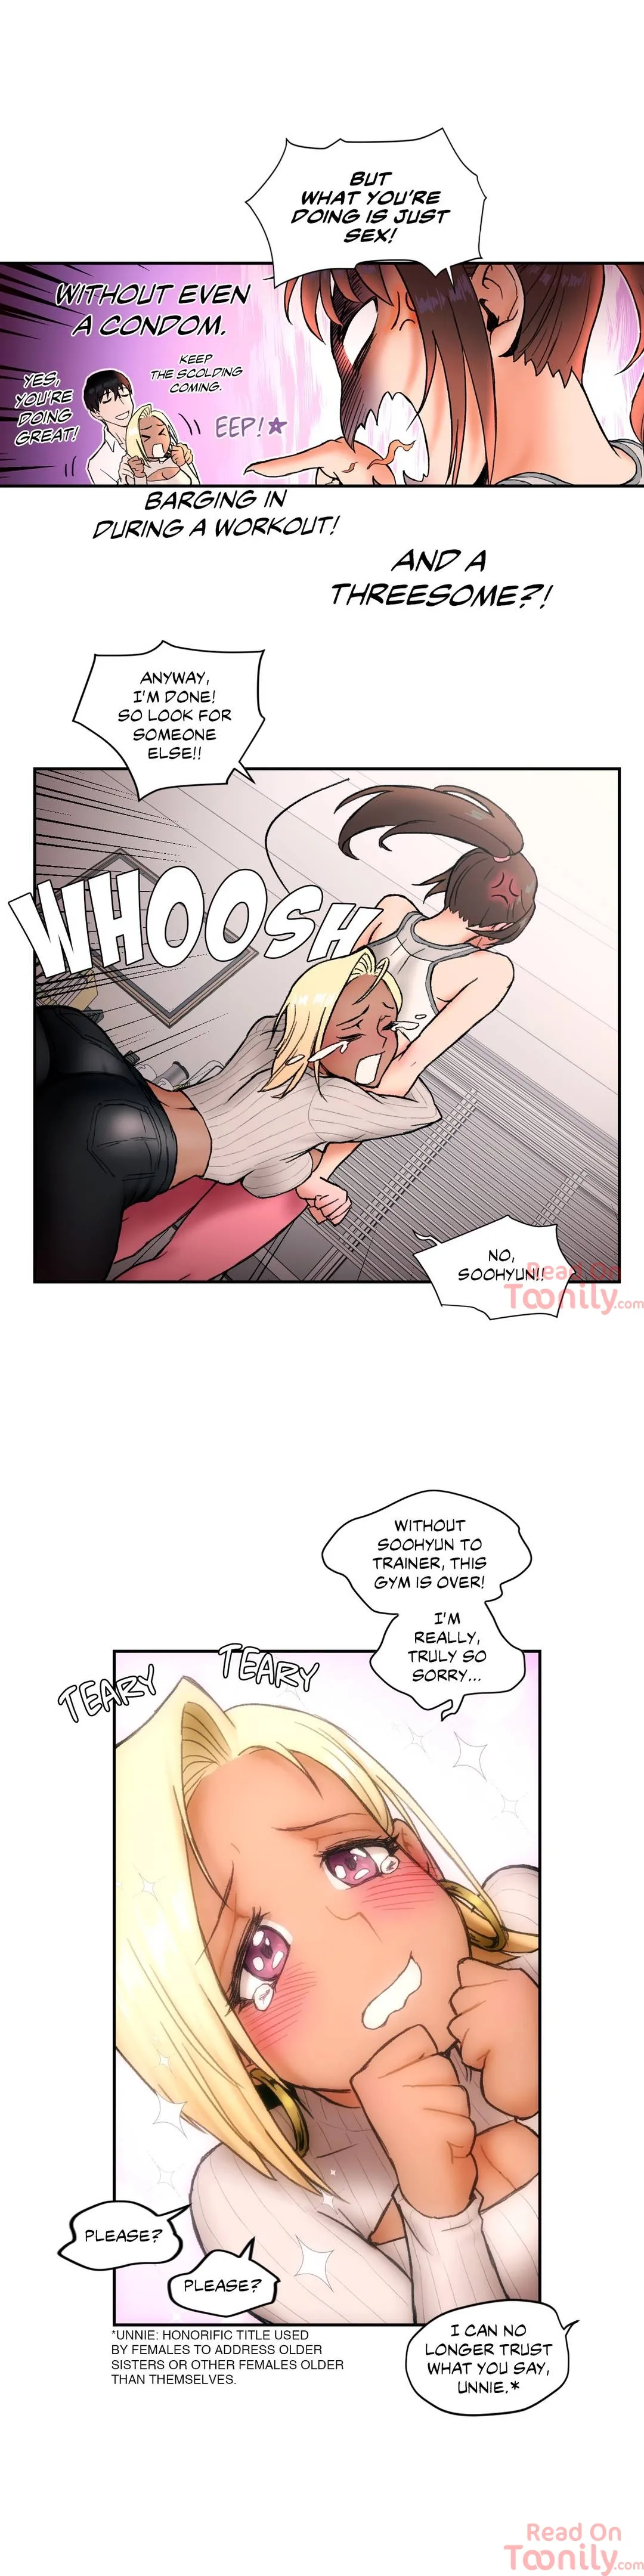 Sexercise - Chapter 6 Page 3